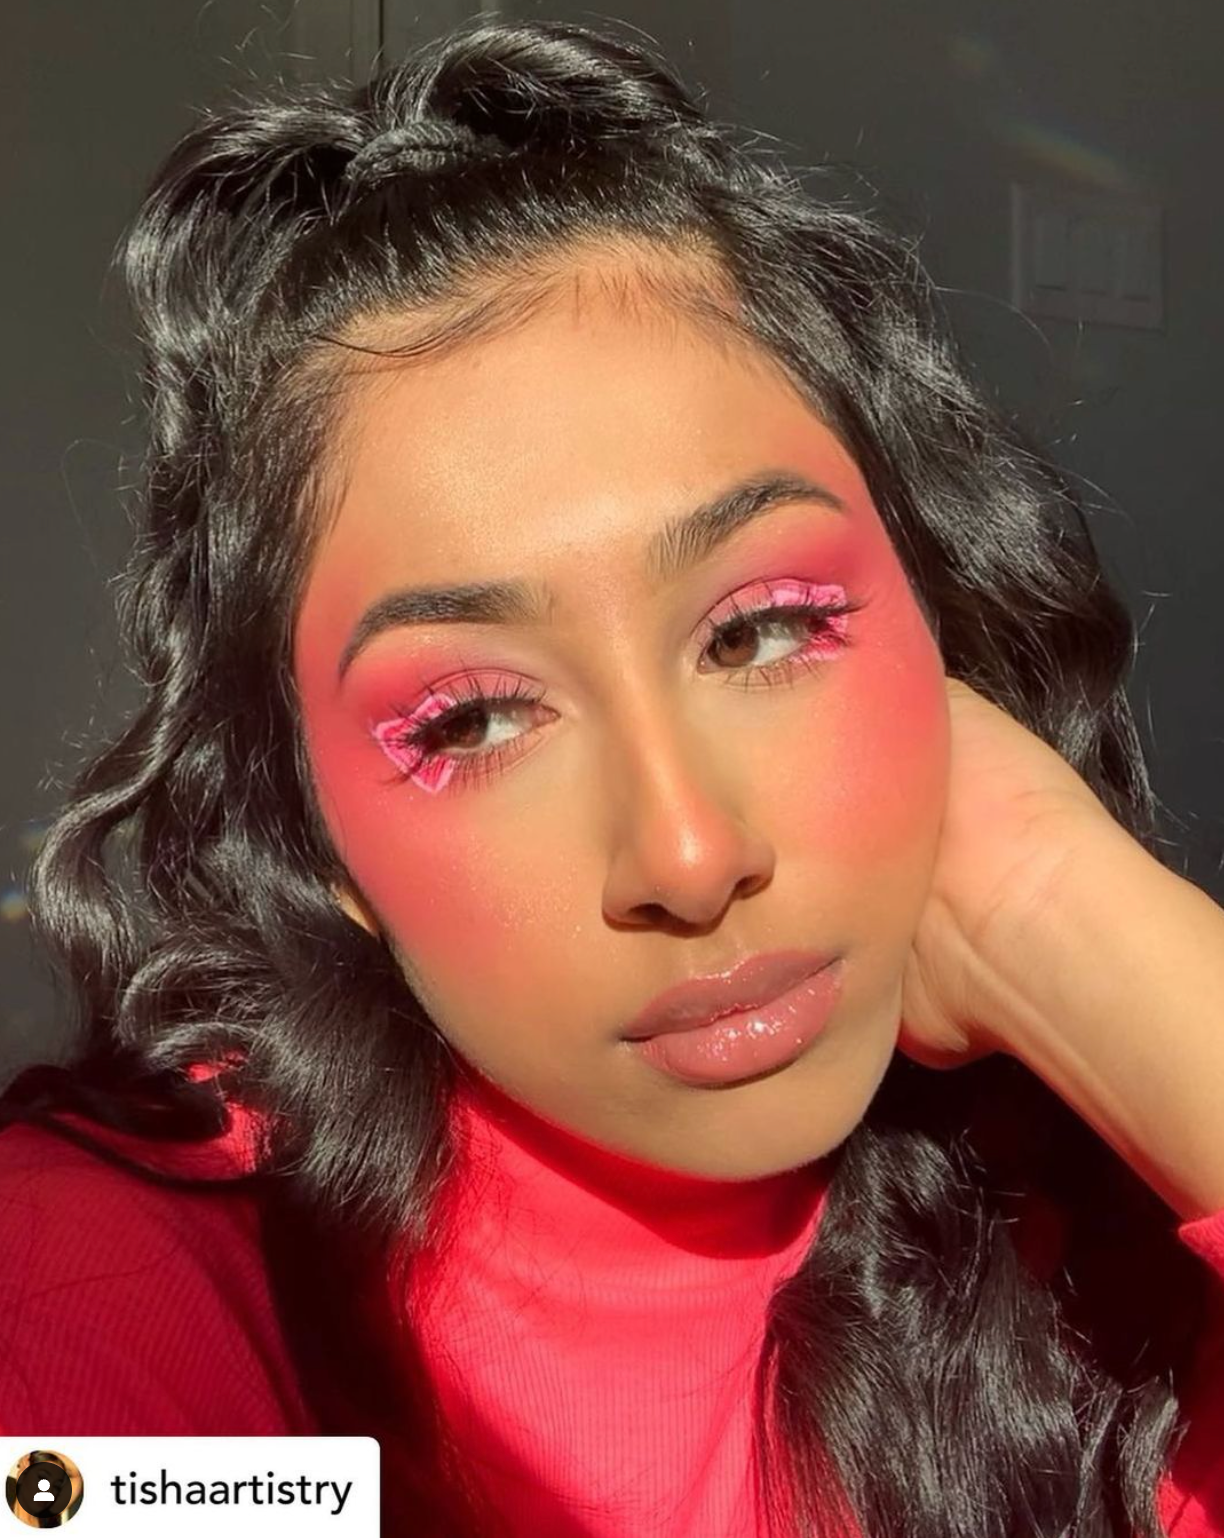 Tisha wearing the bubble gum pastel pink hydro liner.